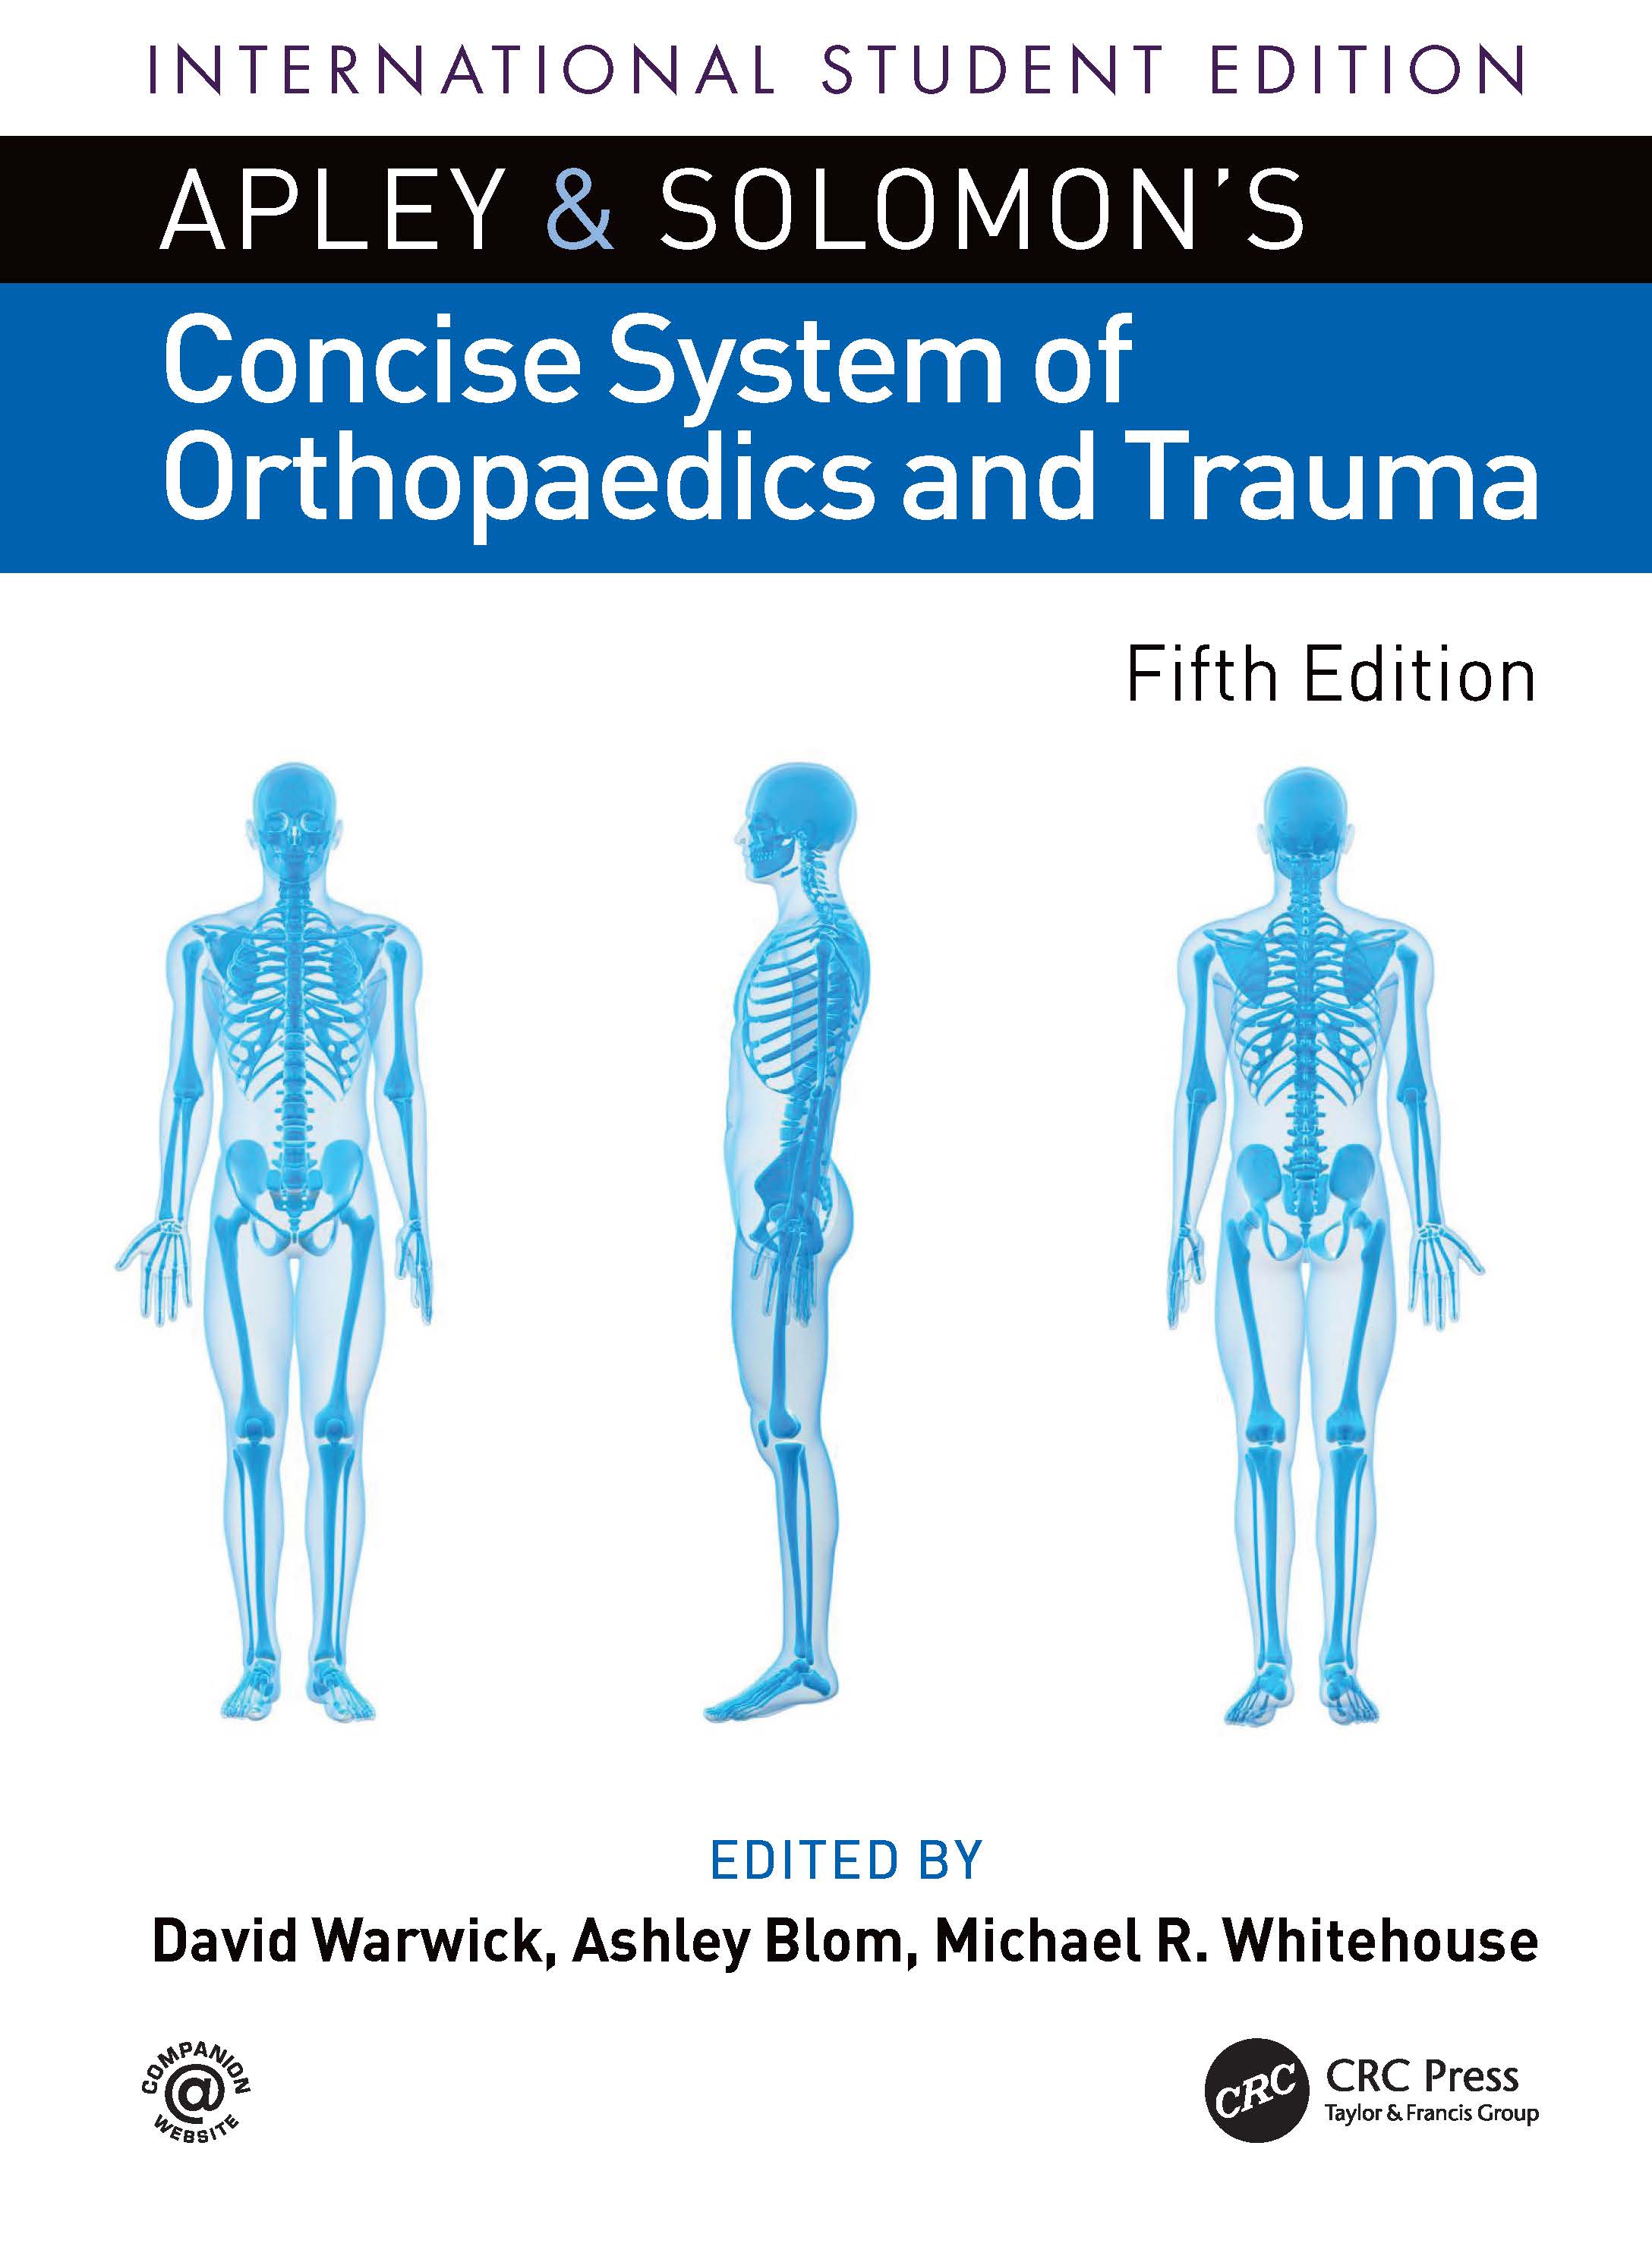 

exclusive-publishers/taylor-and-francis/apley-solomon-s-concise-systems-of-orthopedics-and-trauma-5ed--9780367481841